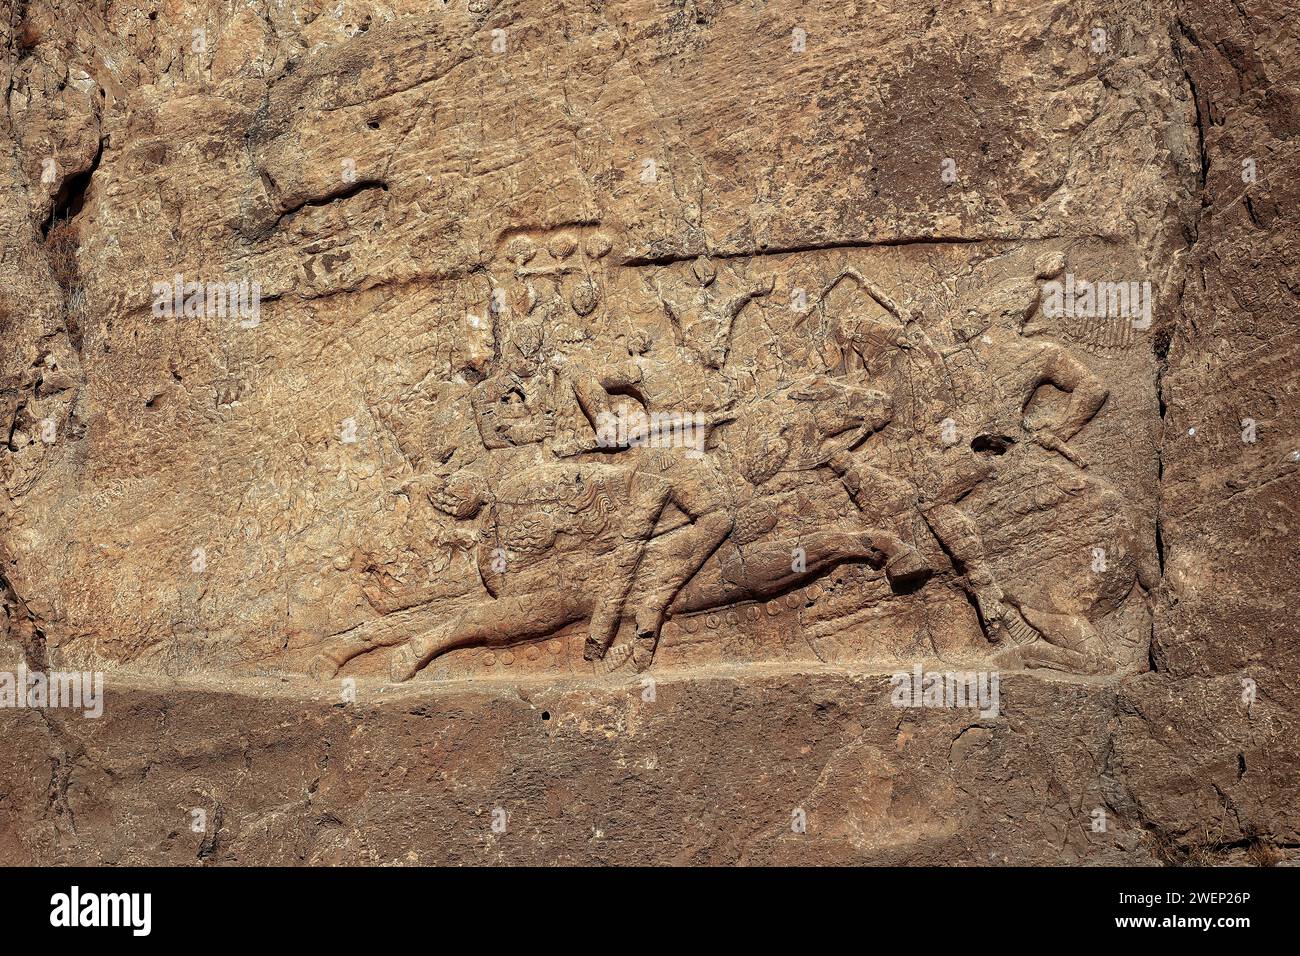 Rock relief depicts the equestrian victory of Shapur II, Sassanid king (309–379 AD) of Persia, over a mounted foe. Naqsh-e Rostam Necropolis, Iran. Stock Photo